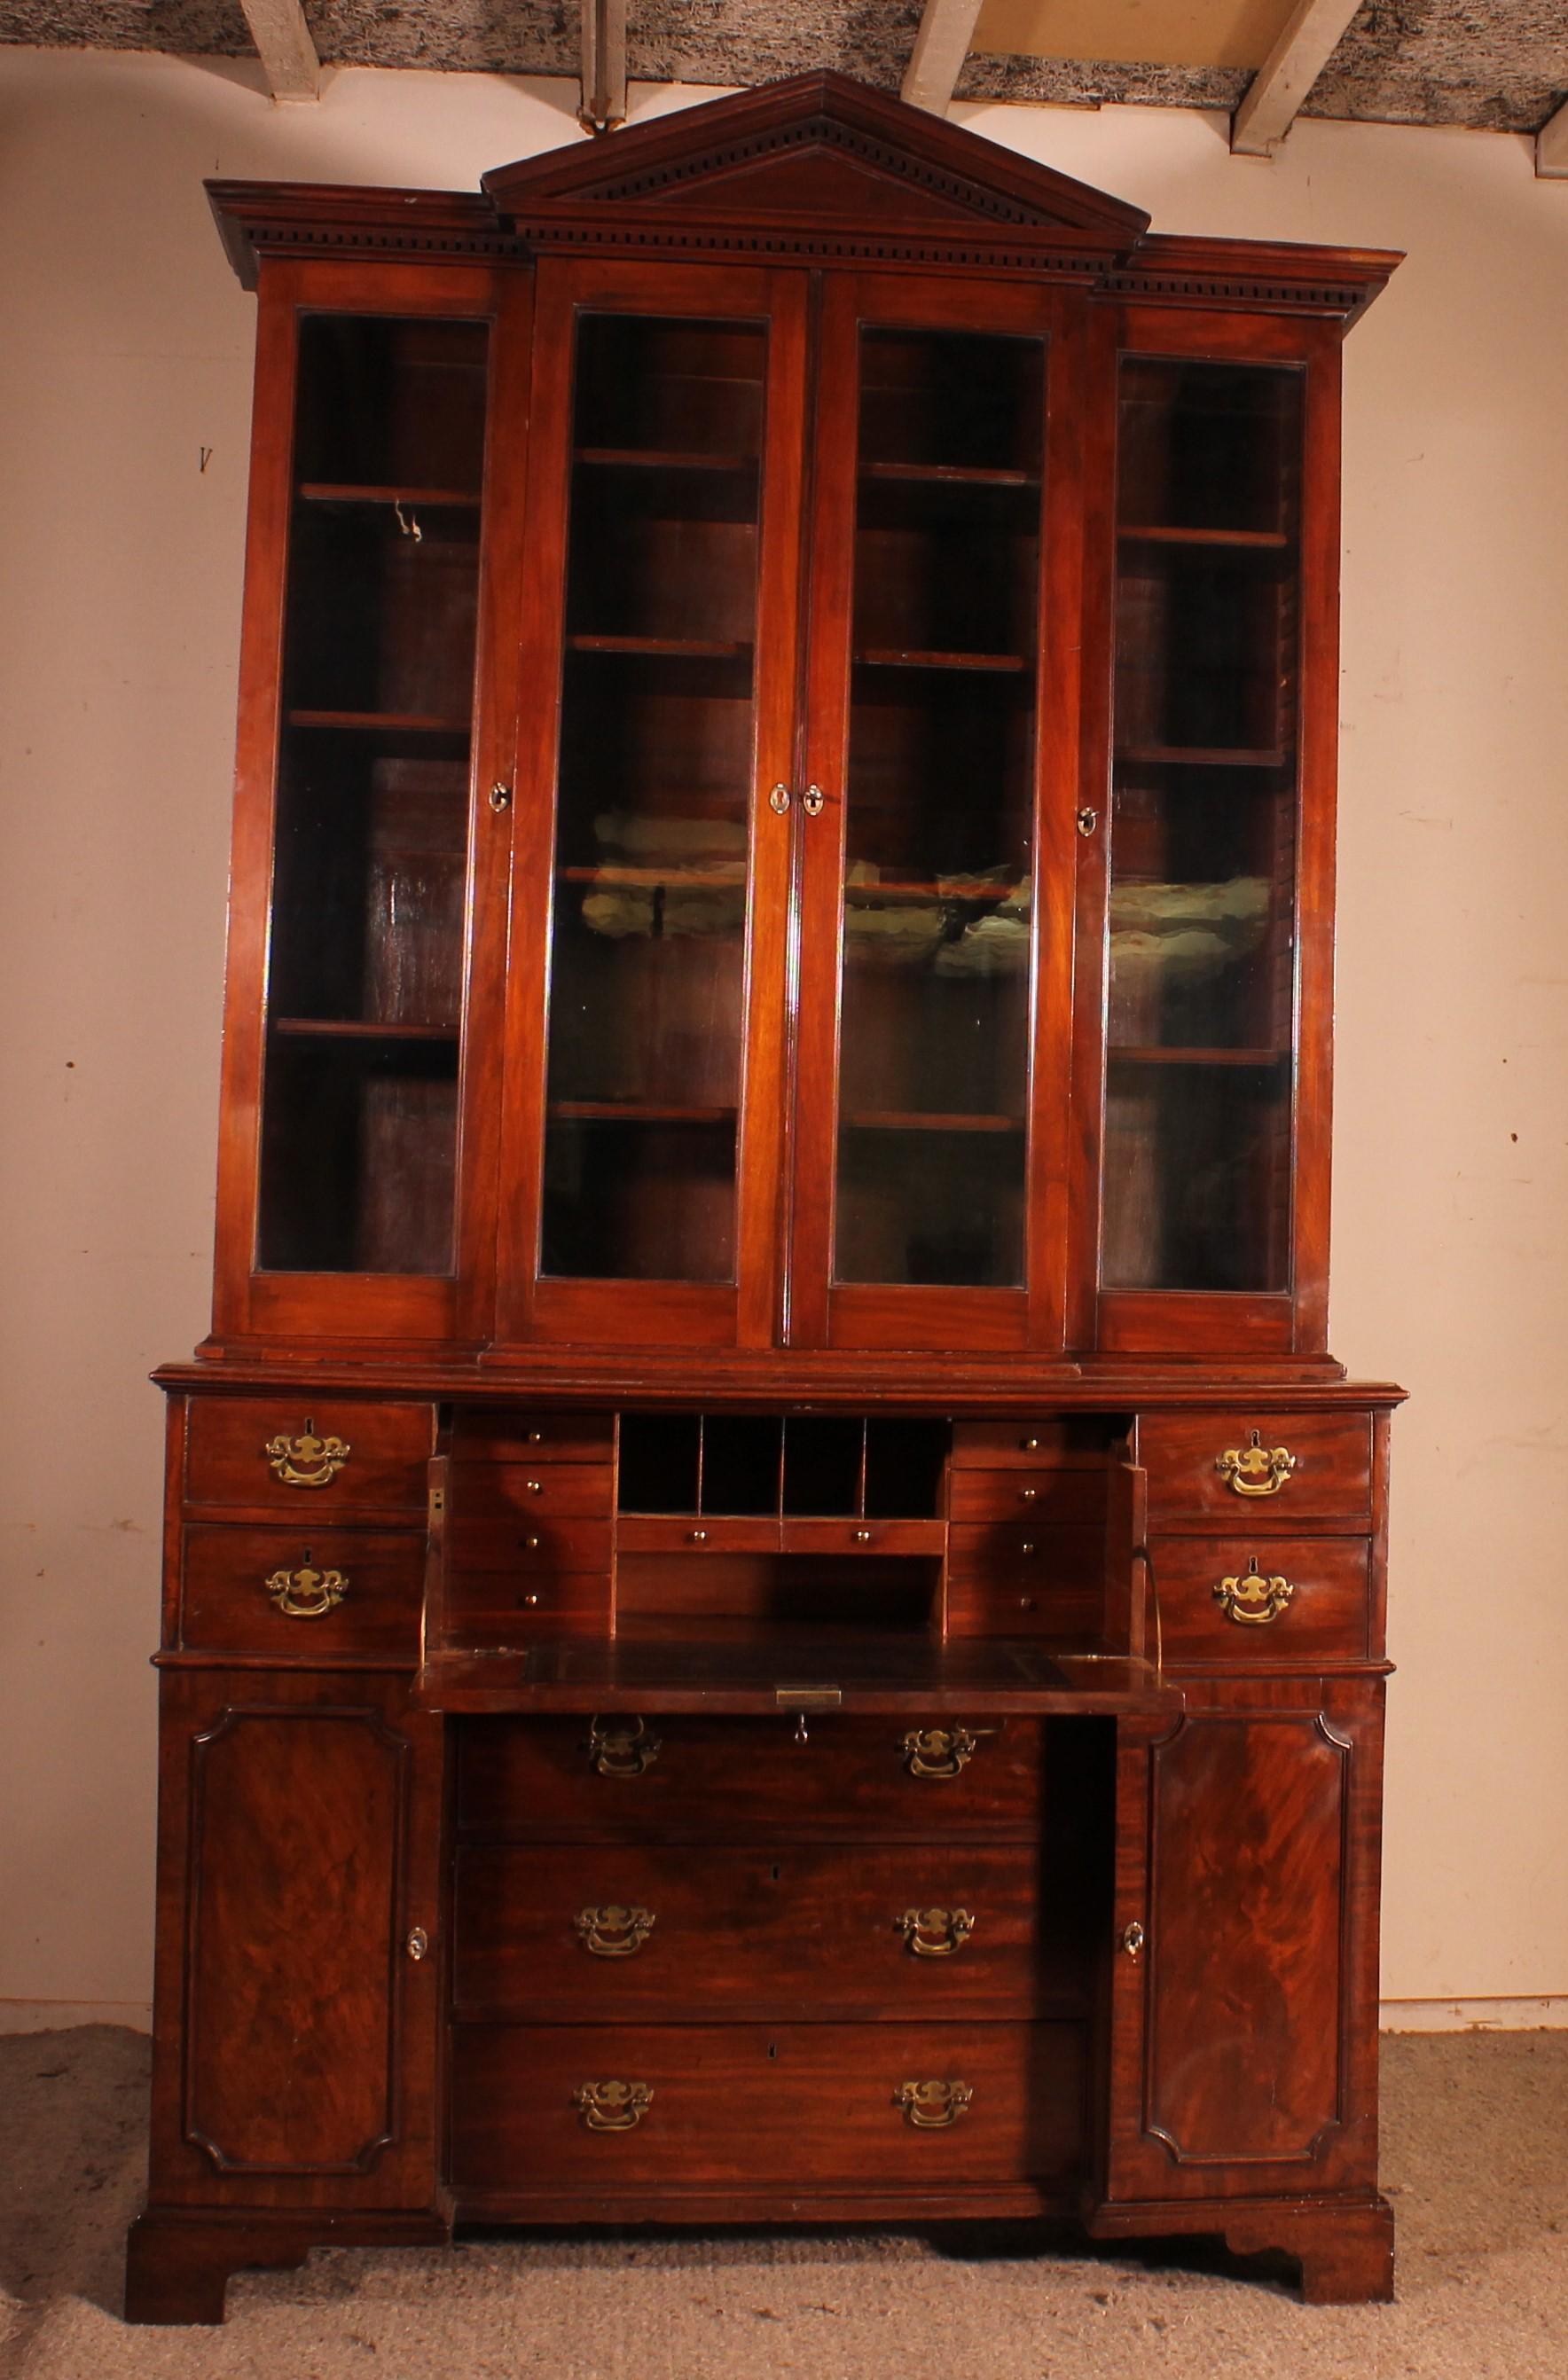 Superb and rare mahogany bookcase or display cabinet from the 18th century from England
very good quality mahogany with a beautiful flame

Small model composed of a lower part with several doors, drawers and a secretary in the center
the secretary